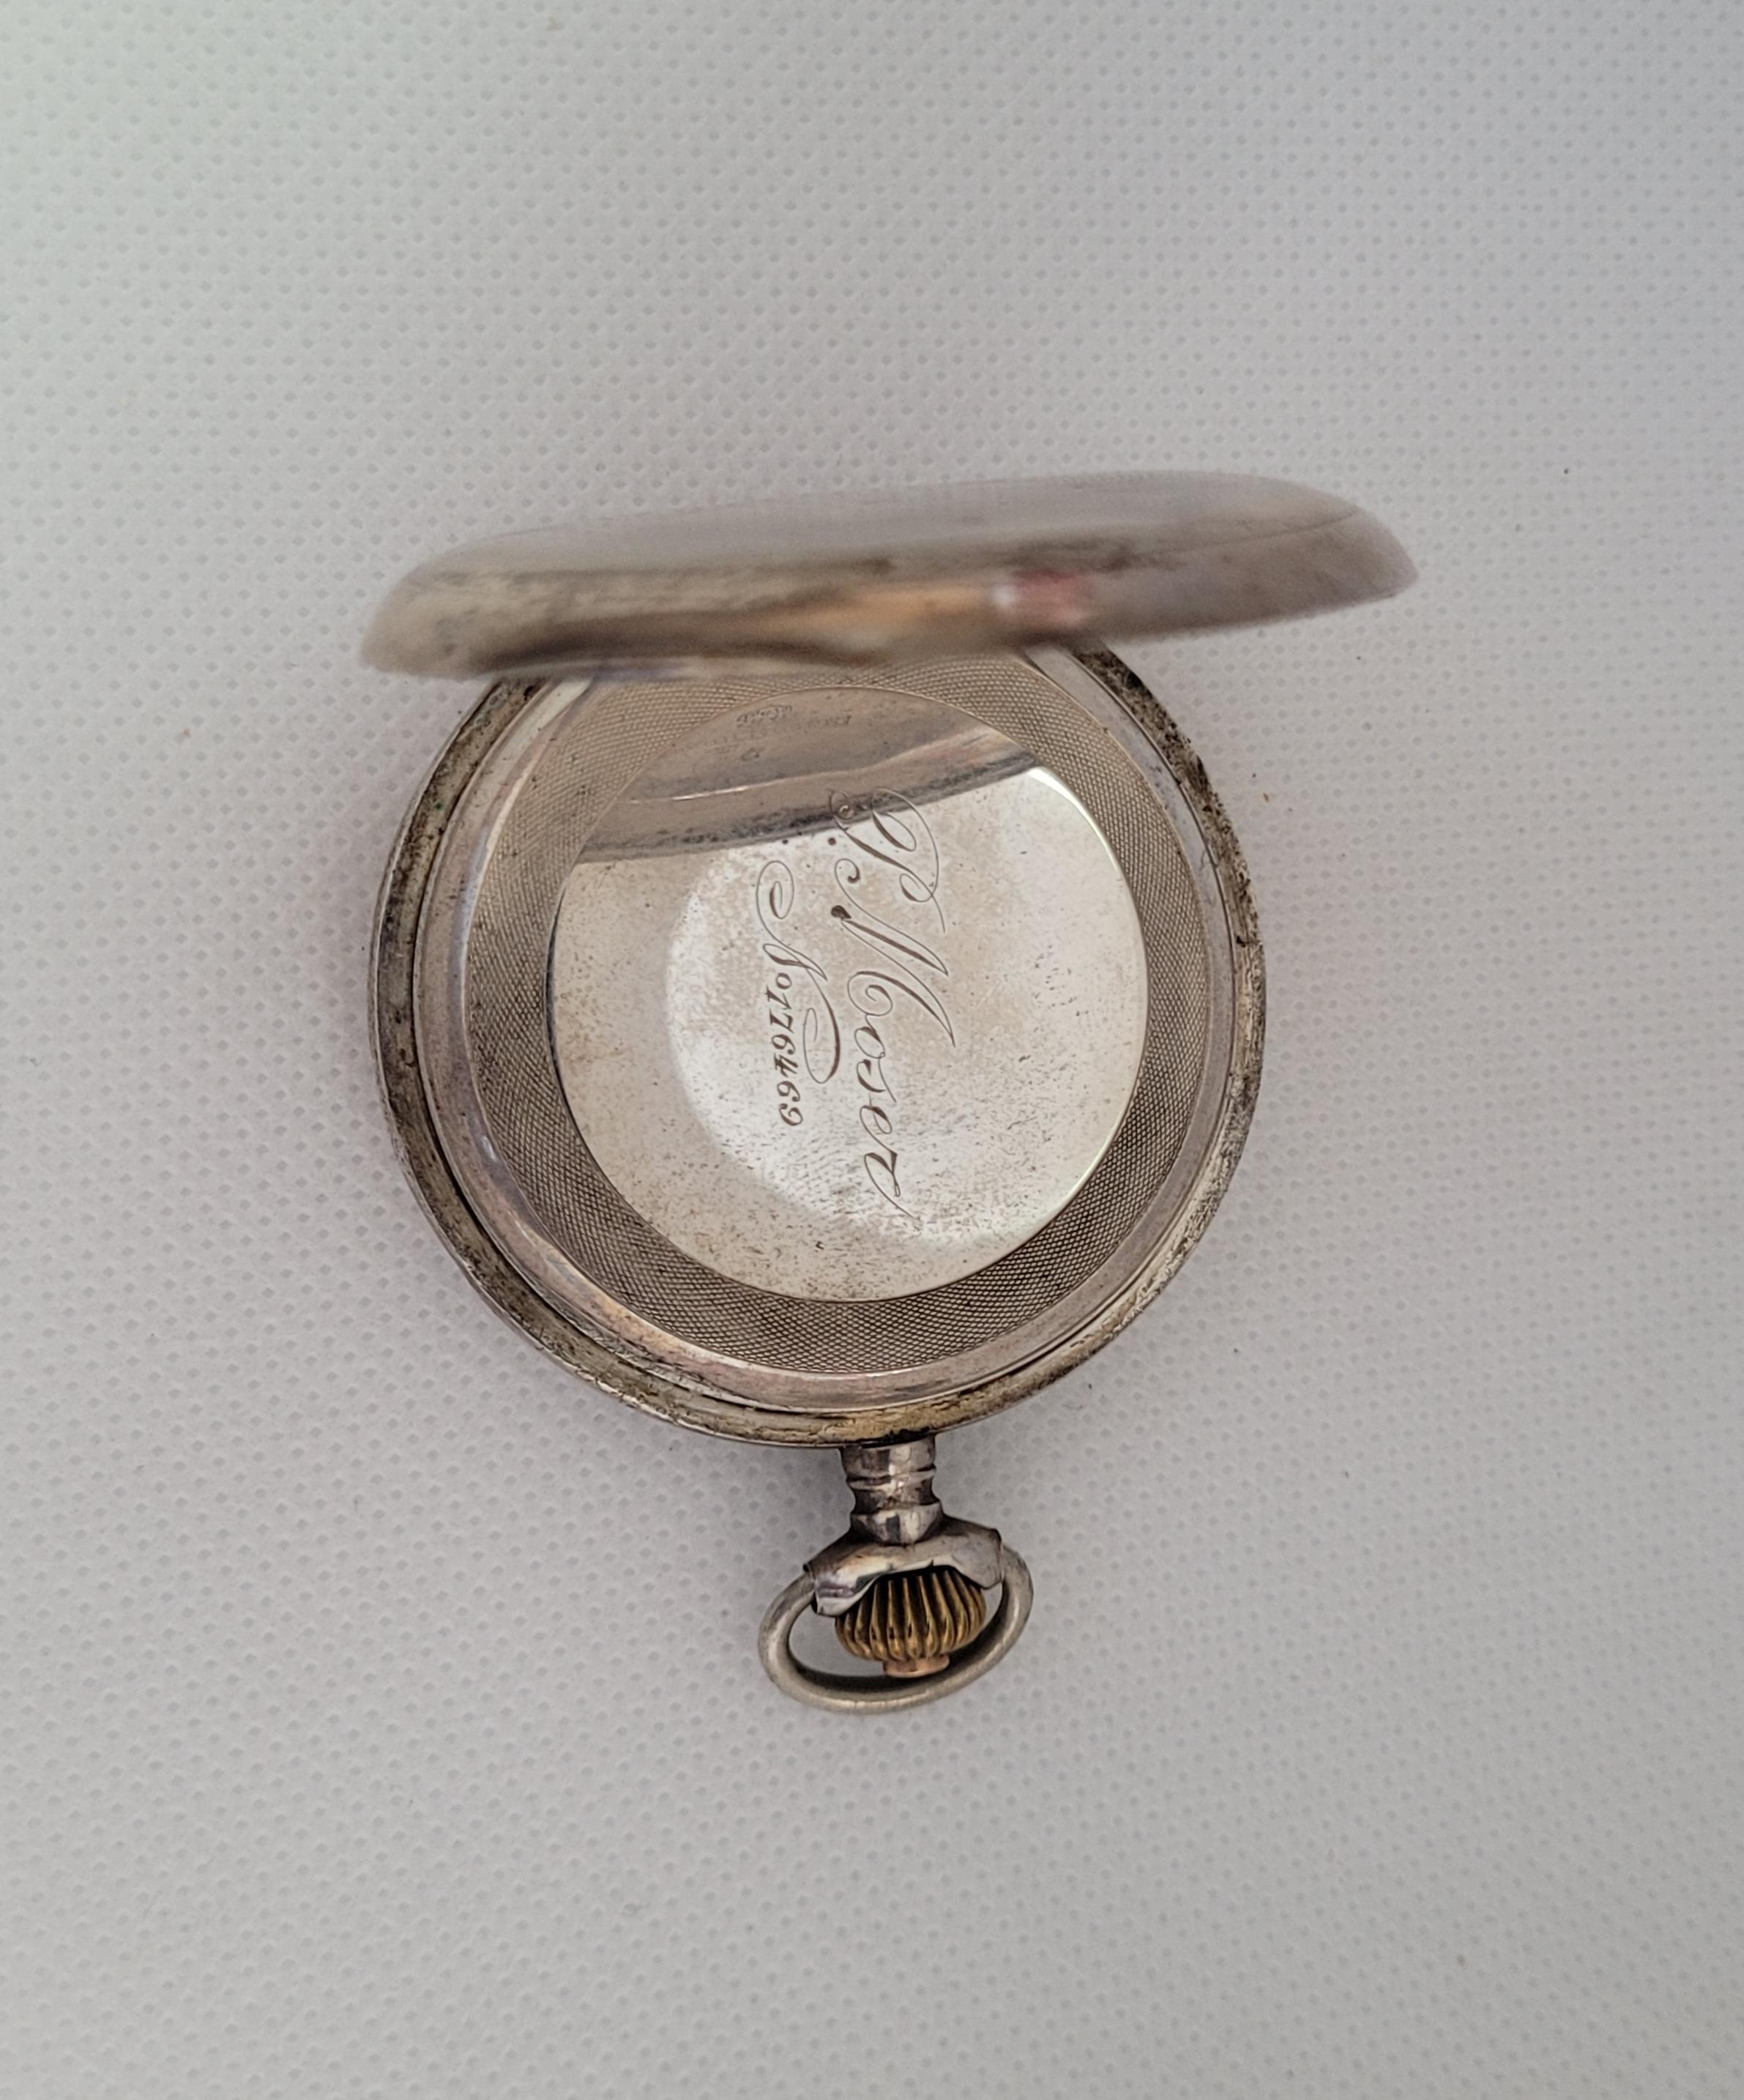 P Moser Pocket Watch Working Case Year 1910 Swiss Made 875 Silver For Sale 2